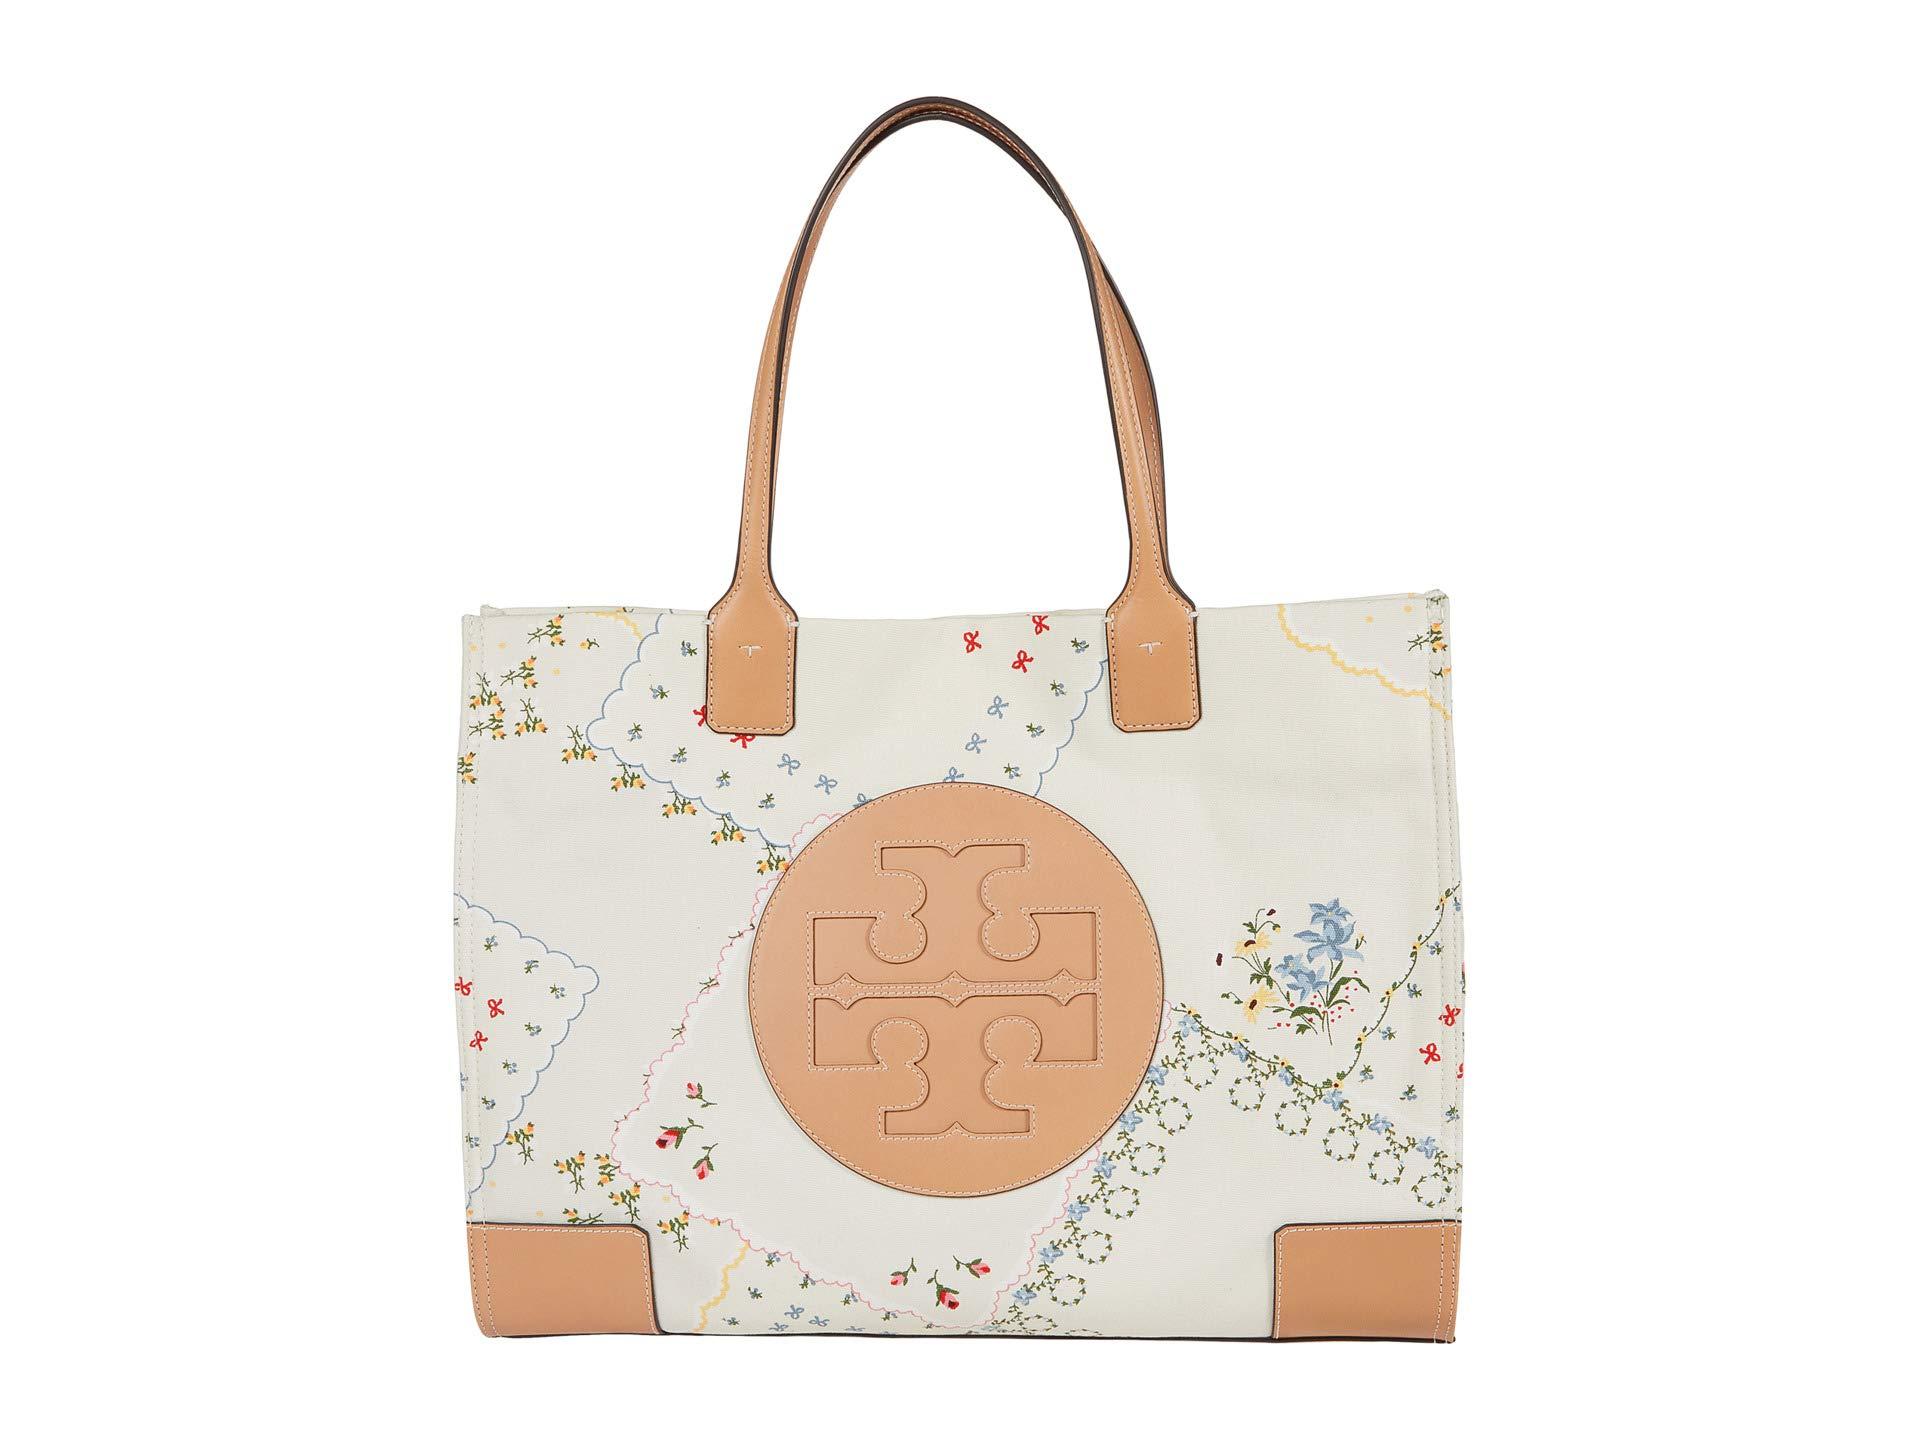 Tory Burch Ella Canvas Floral Tote Bag in White (Natural) - Lyst